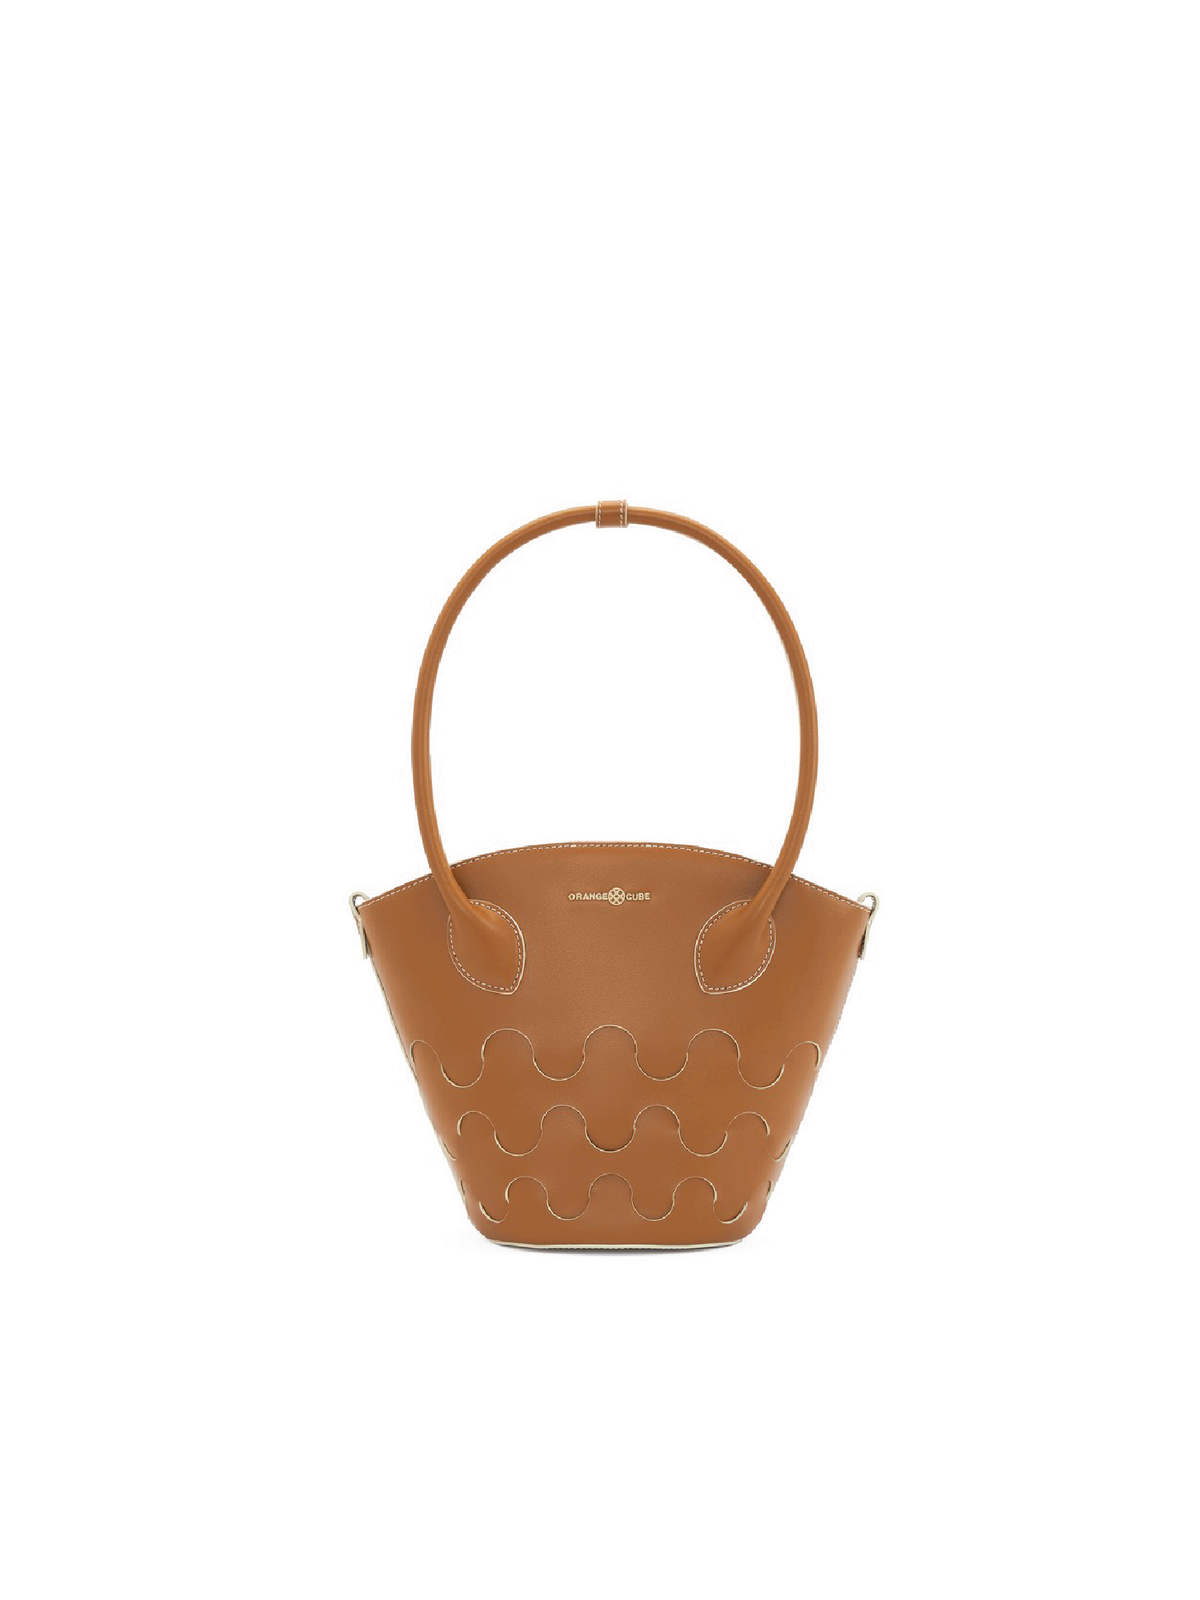 Quilted Impressions Wavy Tote Bag - Brown (Small) - Orange Cube